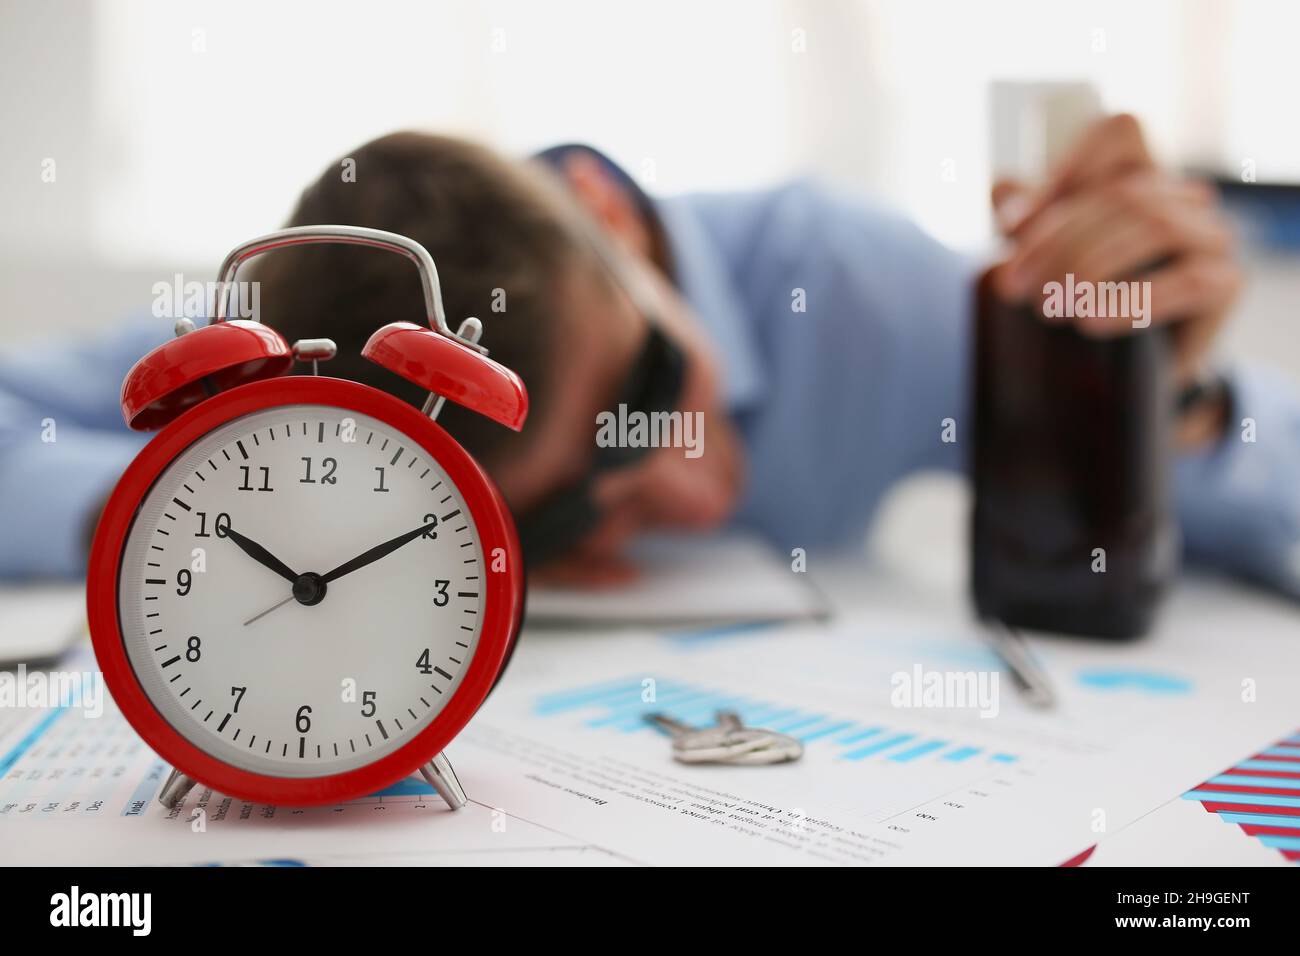 Red vintage clock show time, drunk man fell asleep on workplace in office Stock Photo